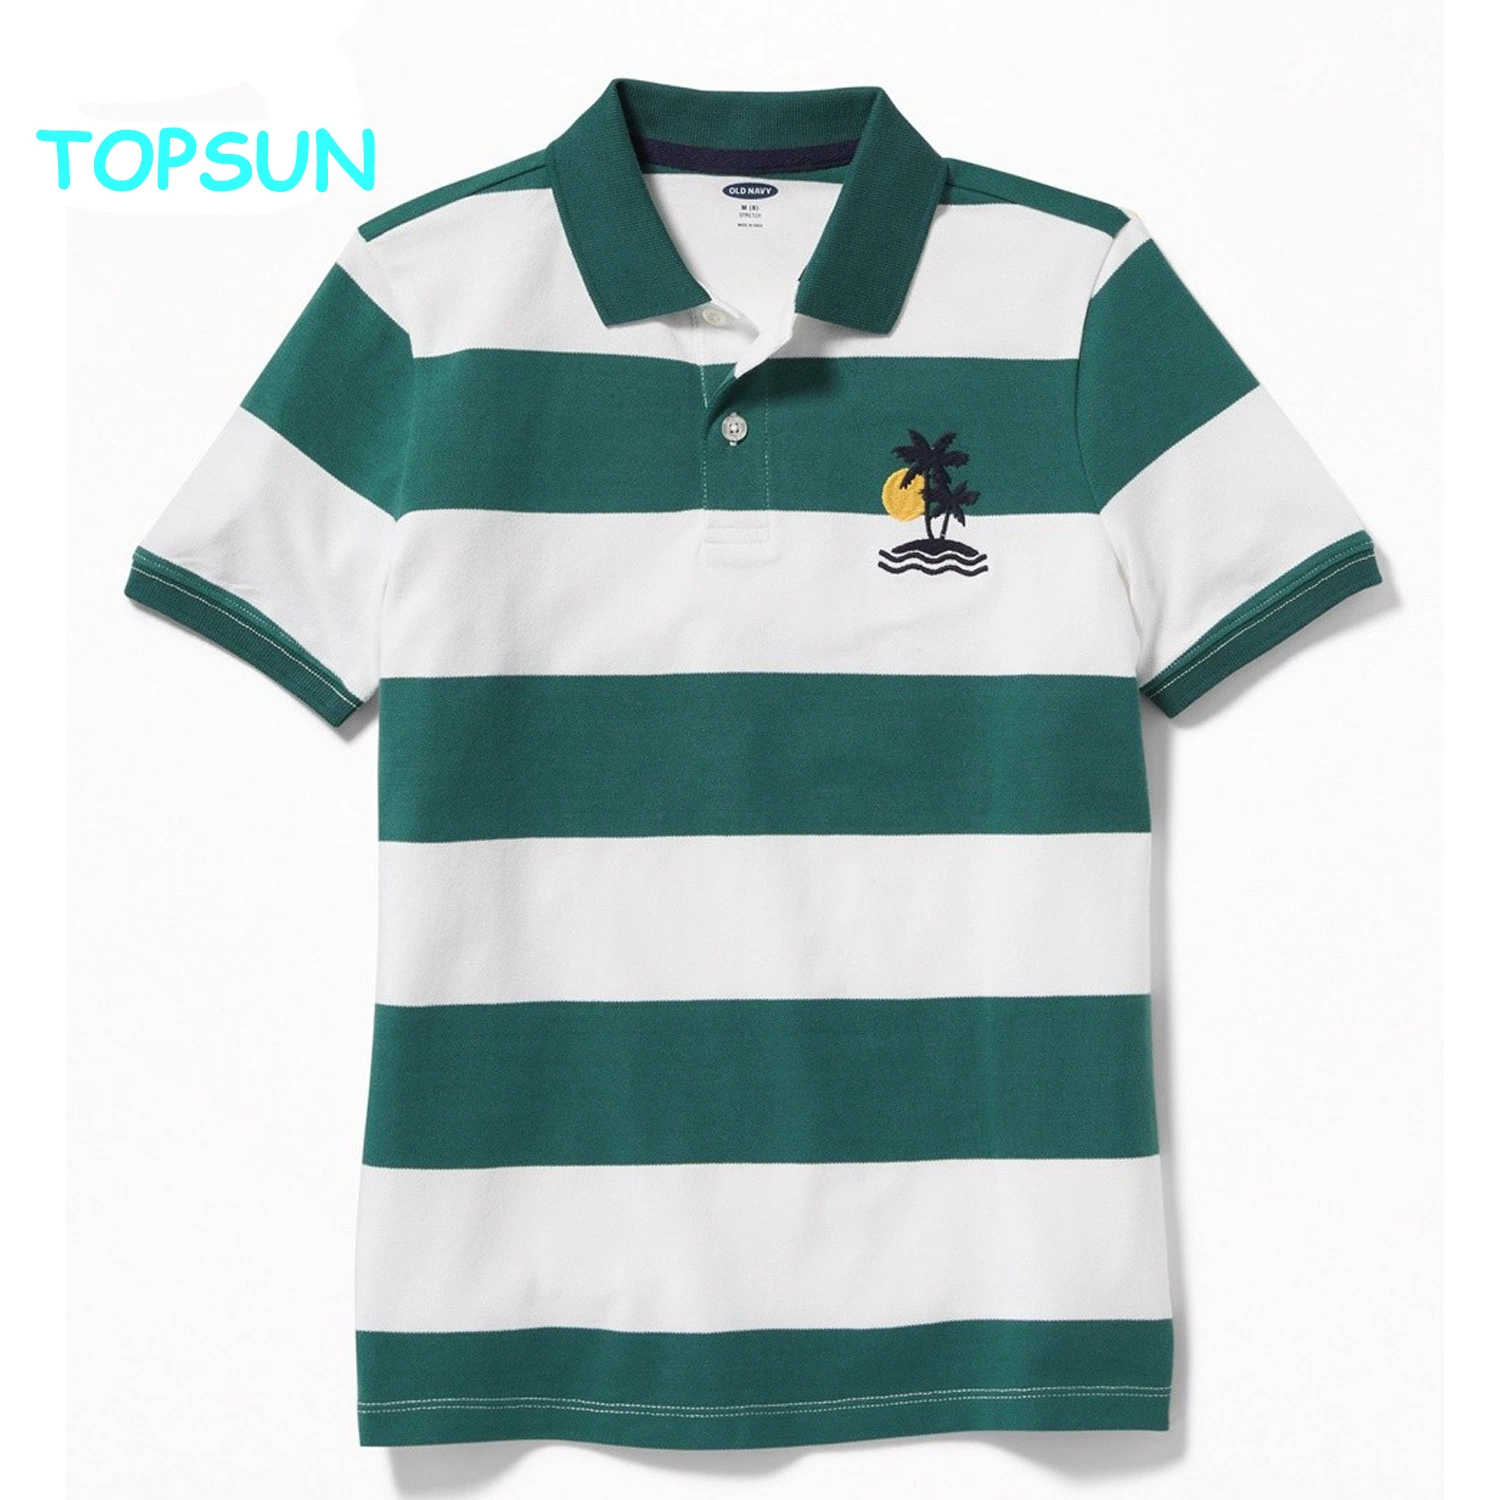 Children's Stripe School Uniform Polo Shirt Boys Cotton Knitting Embroidered Apparel Baby Short Sleeve Clothes